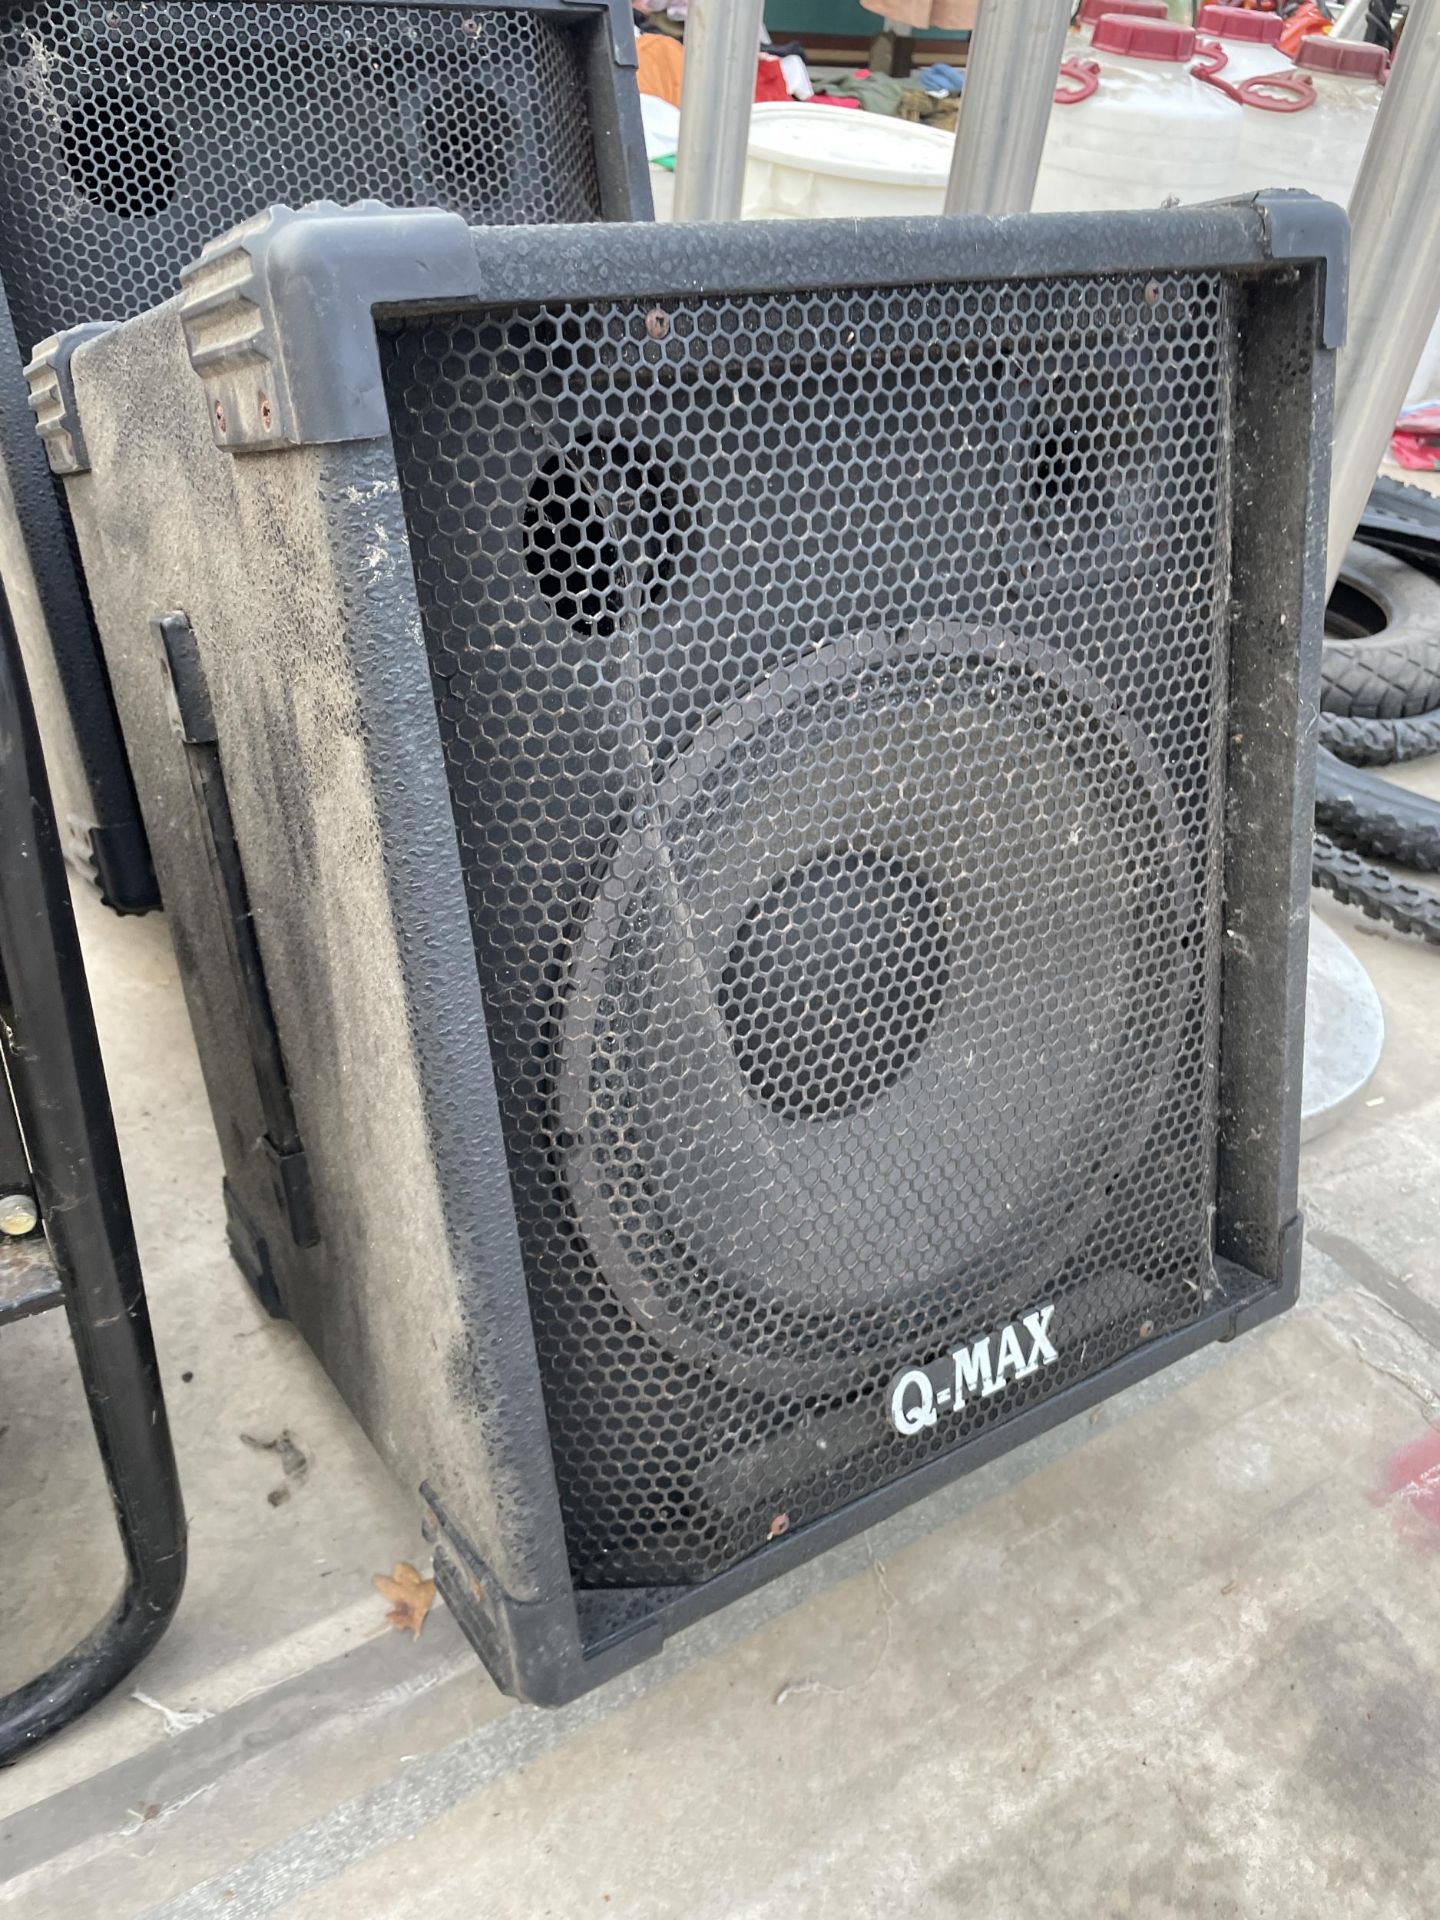 A PAIT OF LARGE Q-MAX SPEAKERS - Image 2 of 2